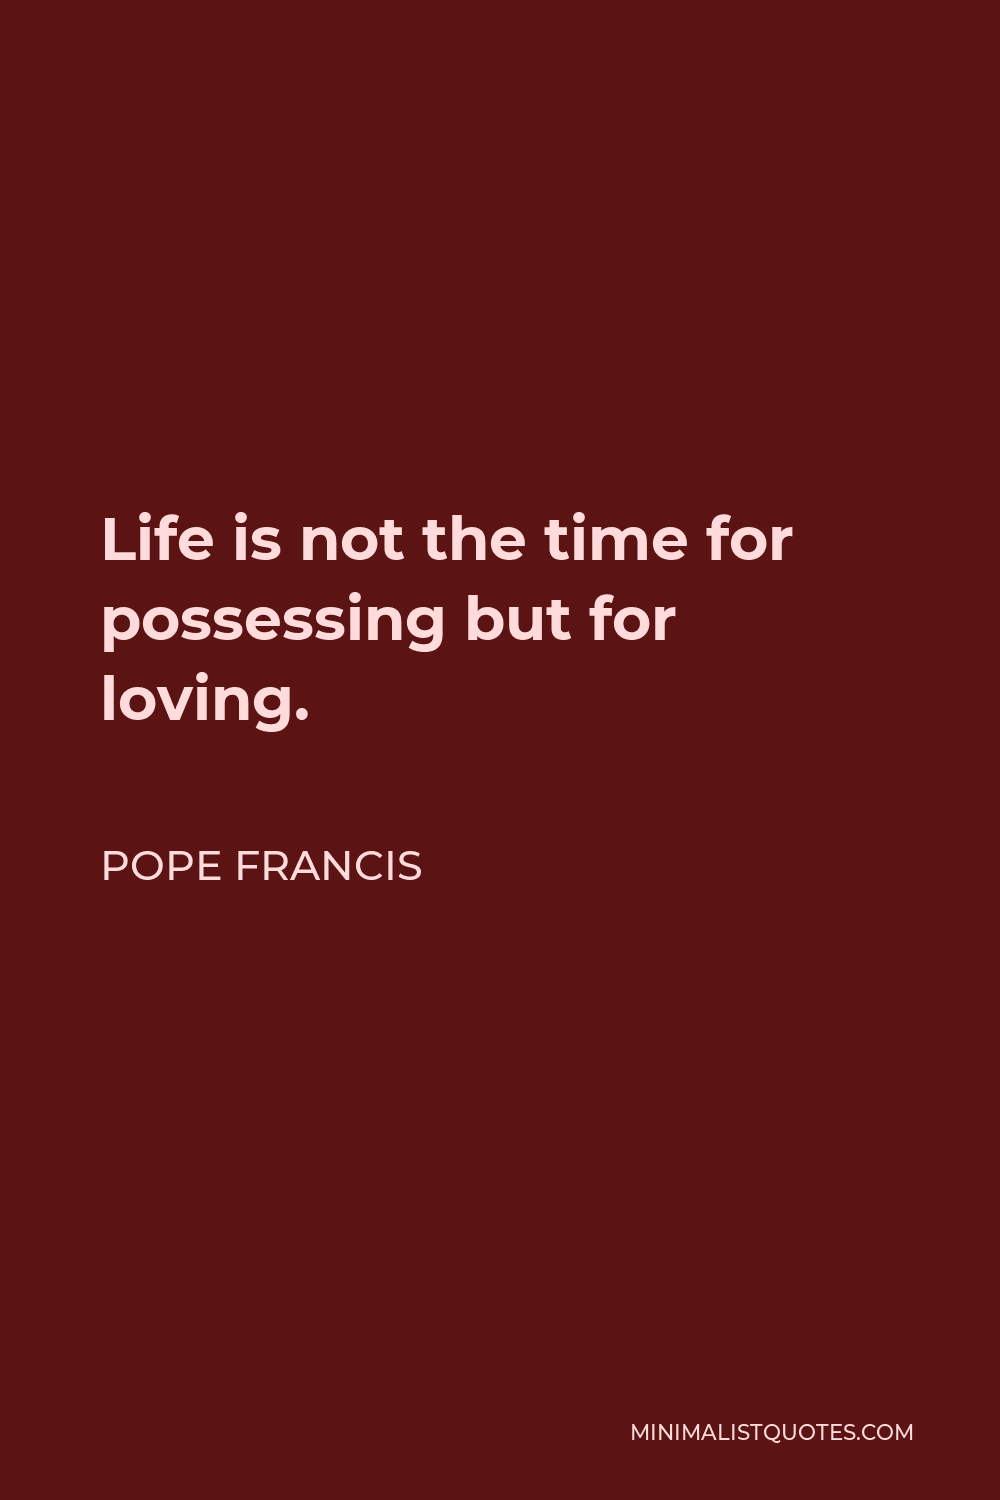 Pope Francis Quote - Life is not the time for possessing but for loving.